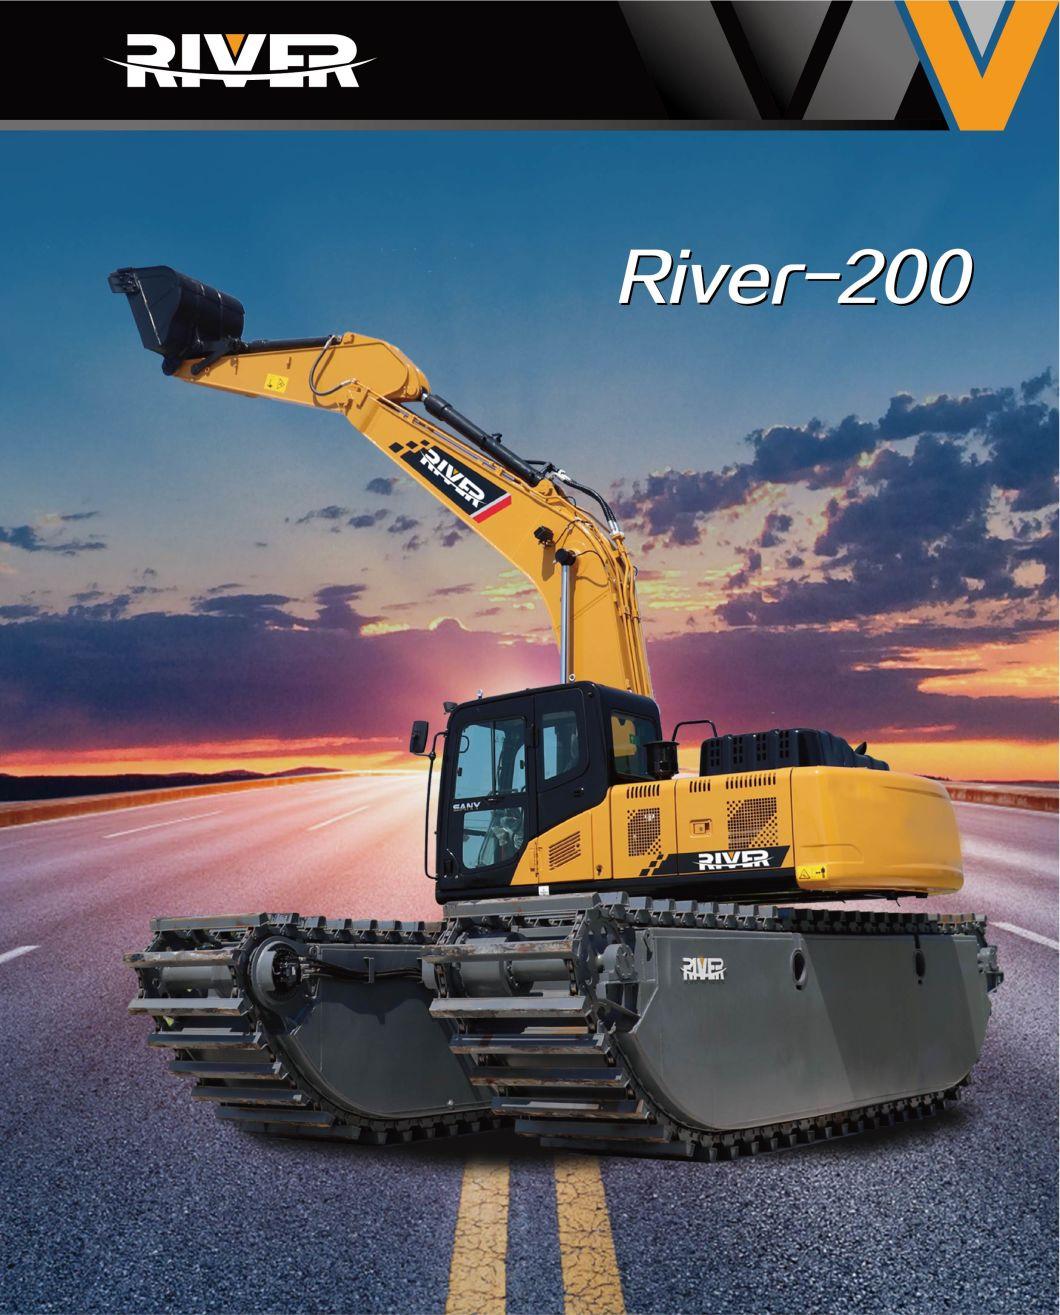 20 Ton Used Cat320c Amphibious Swamp Buggy Excavator in Perfect with Aluminum Track Shoes